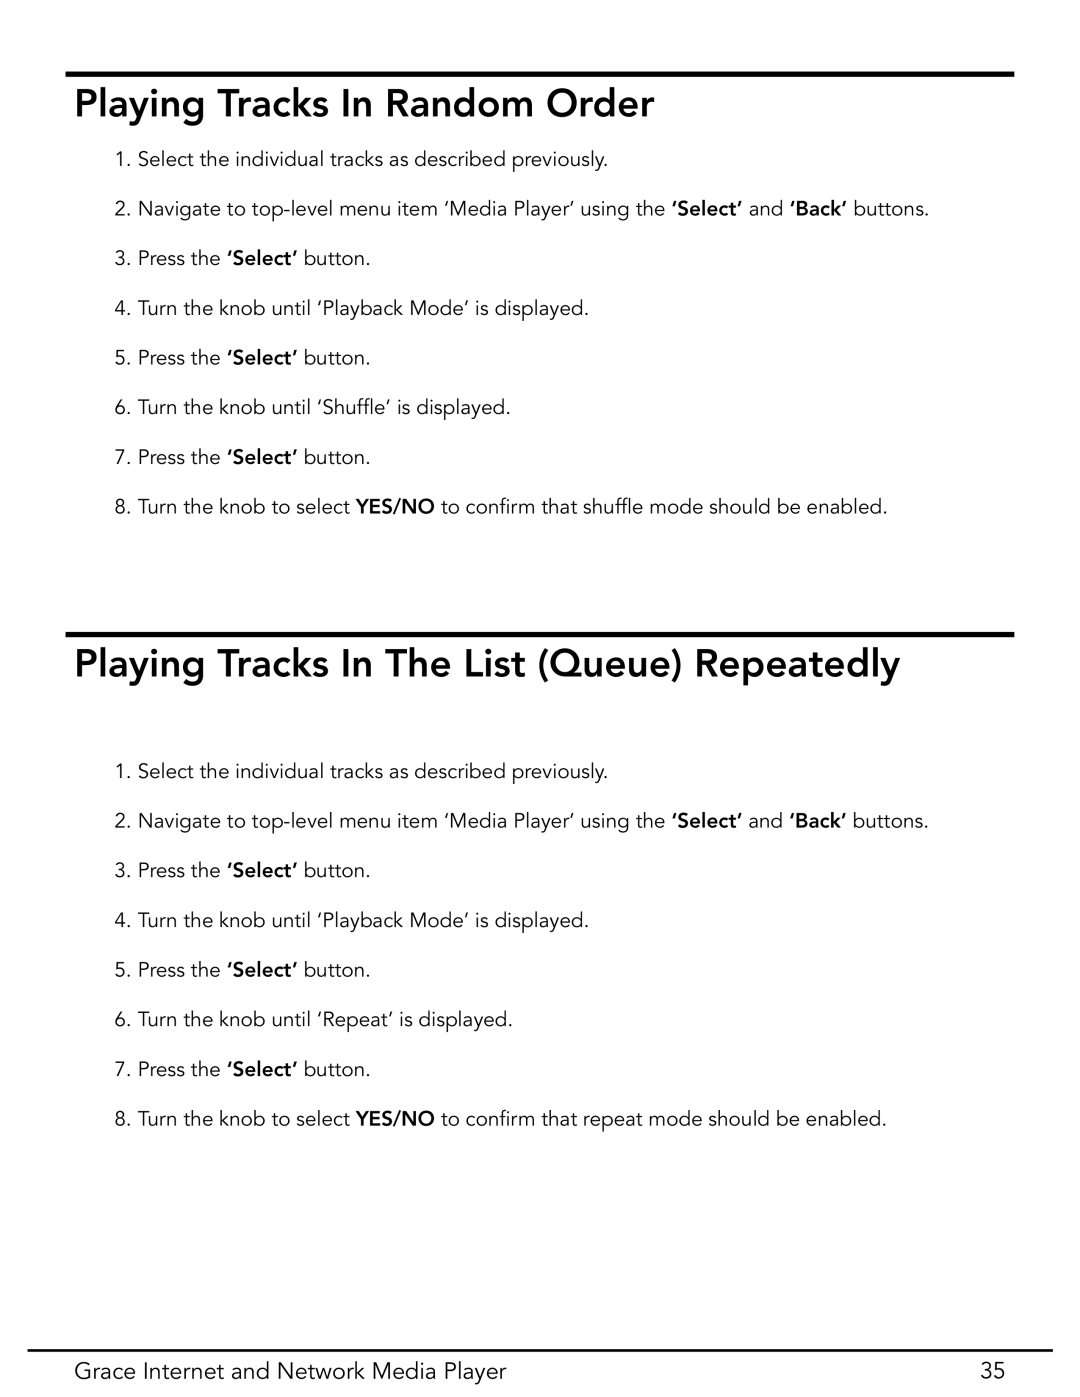 Grace GDI-IR3020 manual Playing Tracks In Random Order, Playing Tracks In The List Queue Repeatedly 